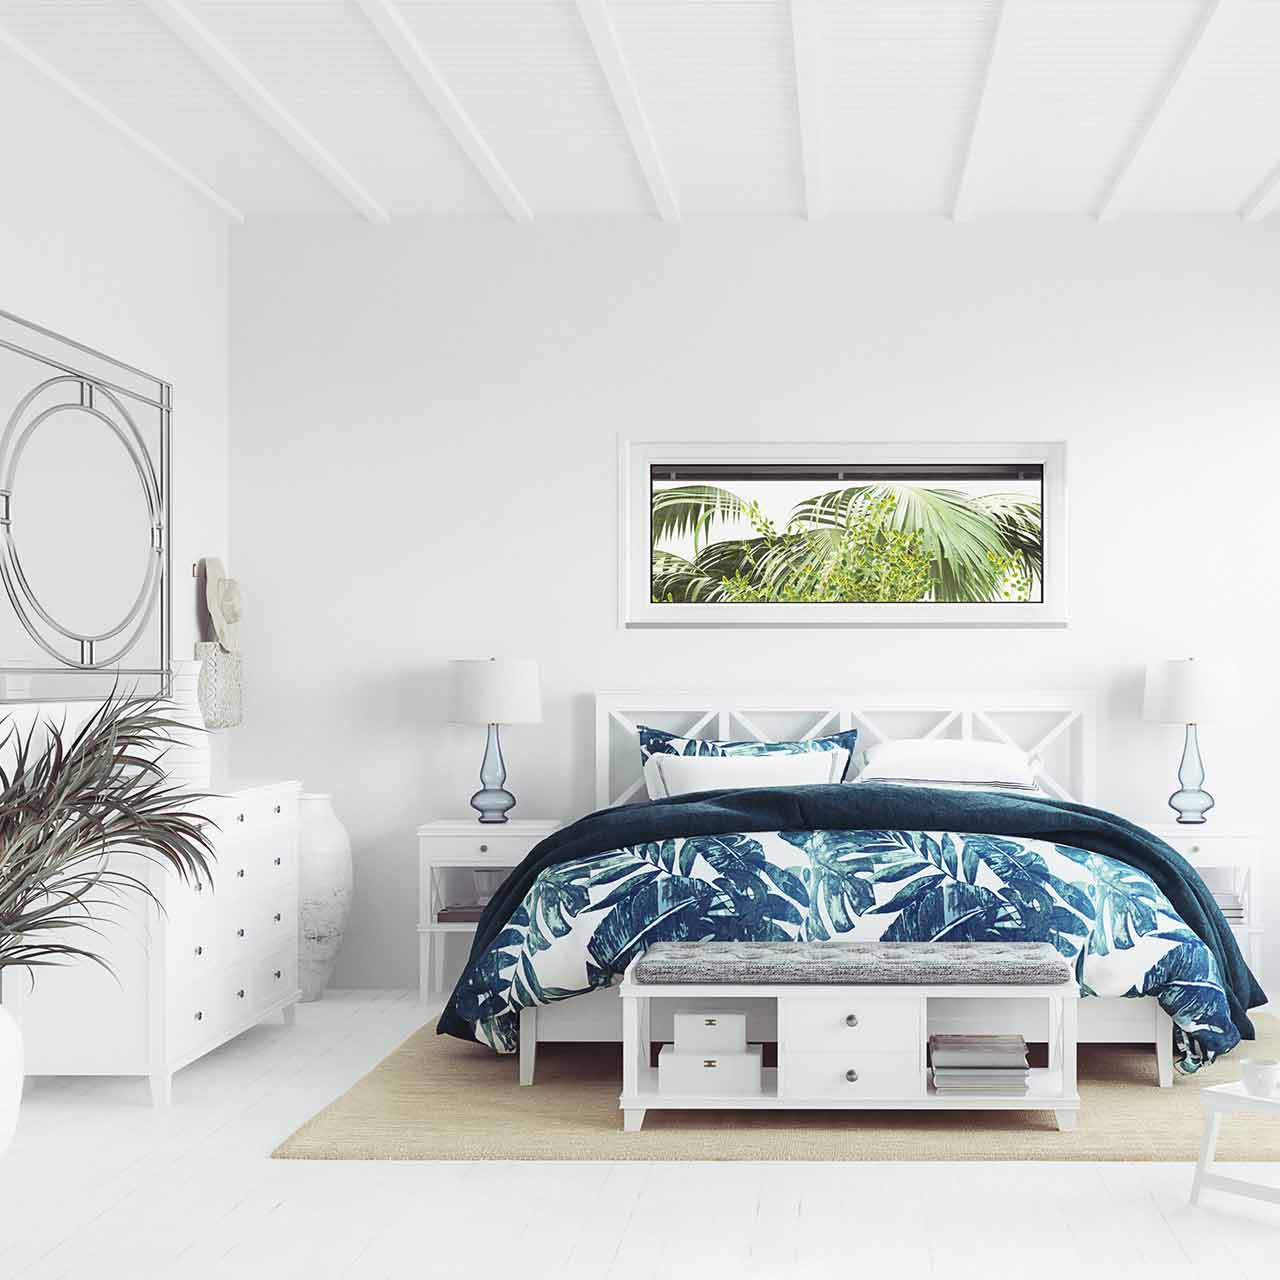 Coastal style bedroom interior design is casual, peace inspiring and timeworn furnishings